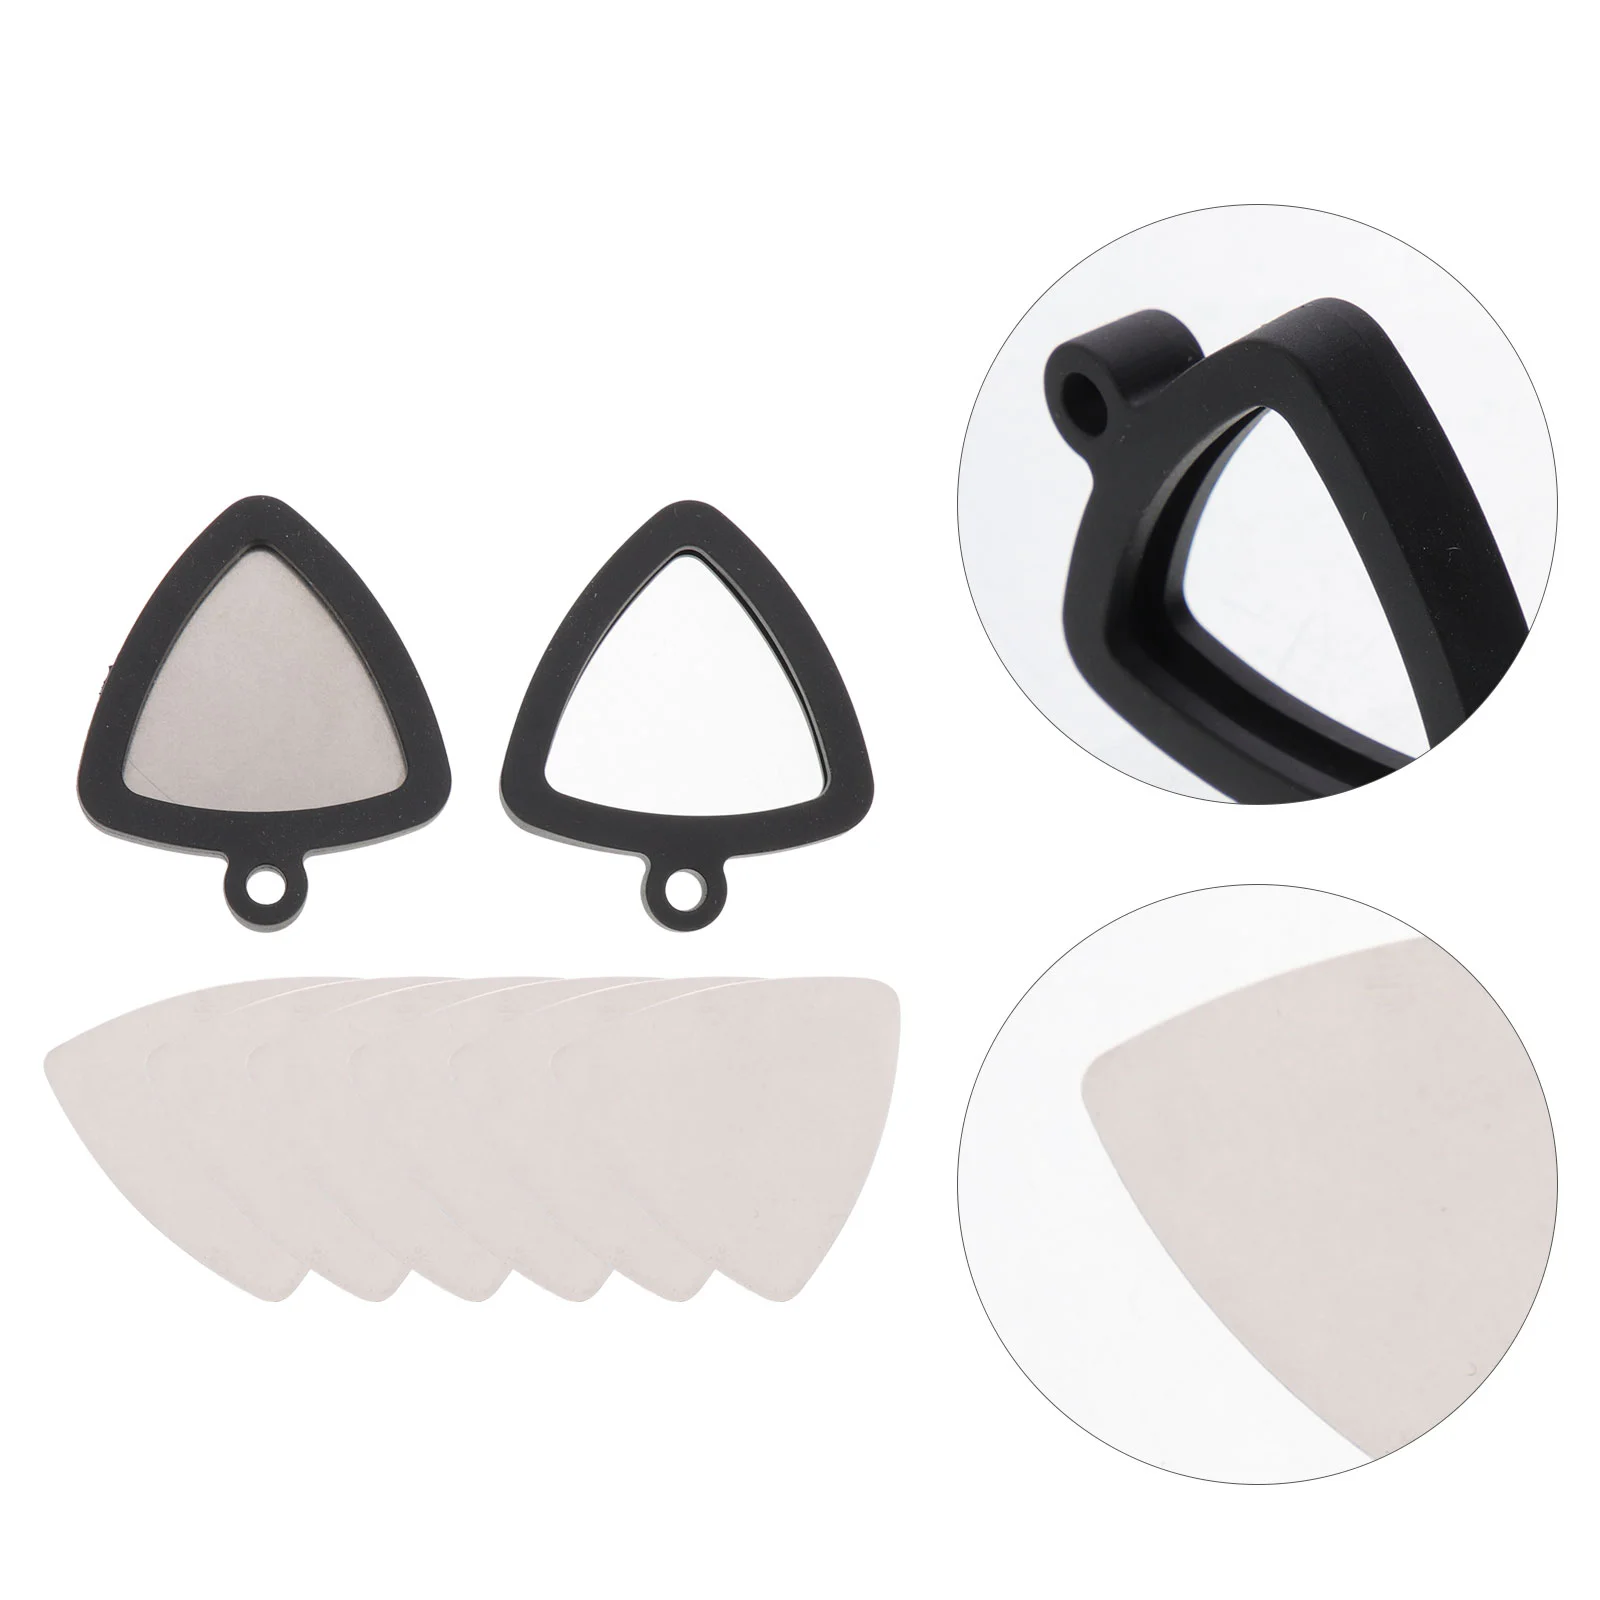 

Of Silicone Picks For Guitar Stainless Steel Picks On Both Sides With Picks Sound Music Picks FM Guitar Accessories